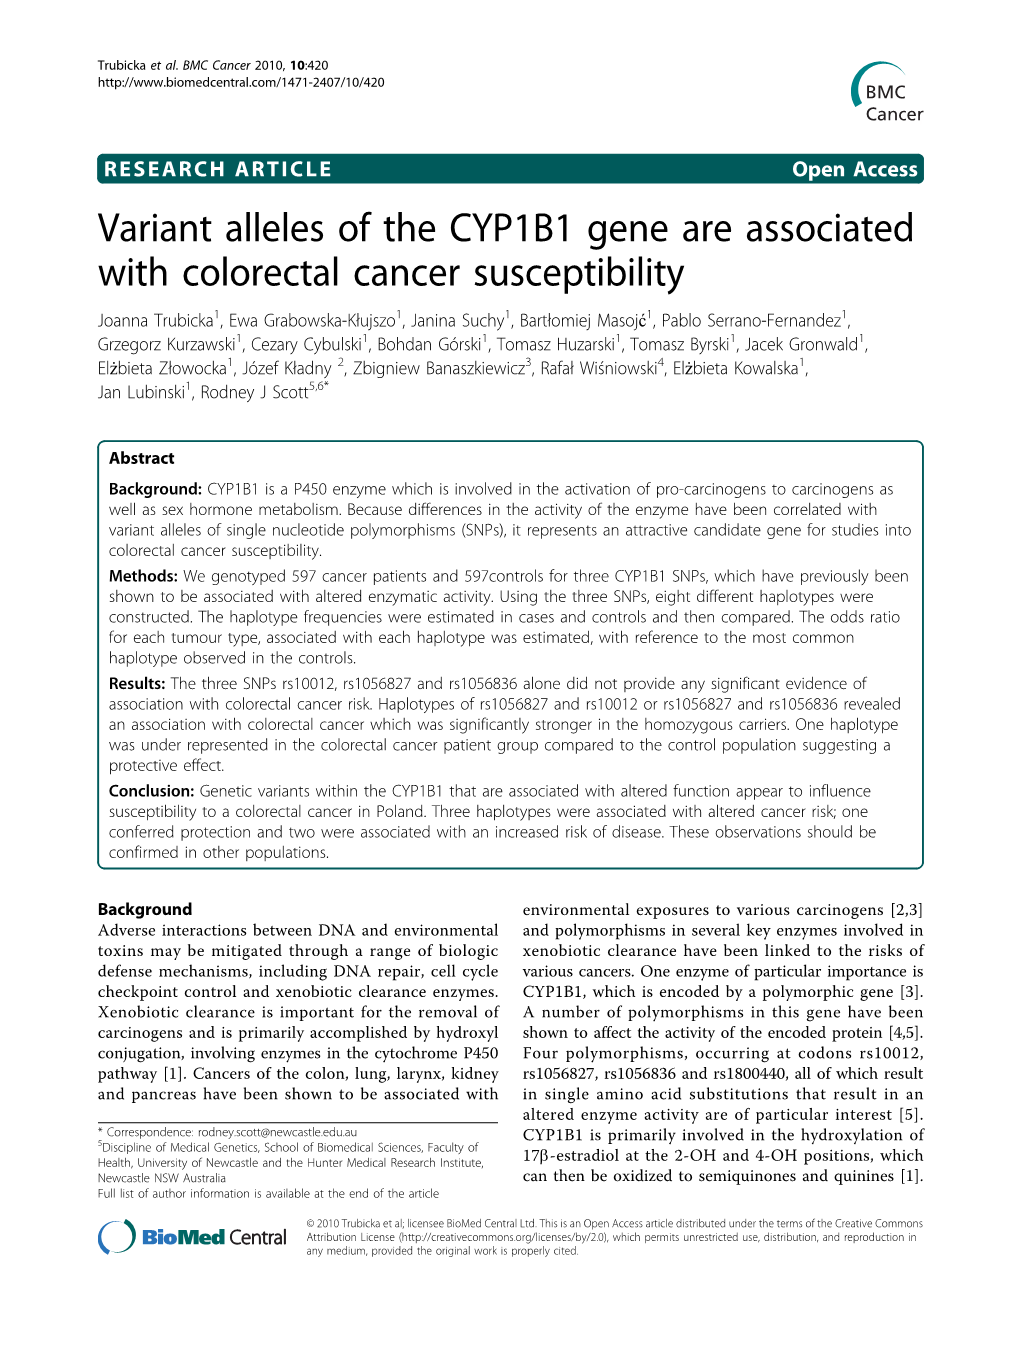 Variant Alleles of the CYP1B1 Gene Are Associated with Colorectal Cancer Susceptibility